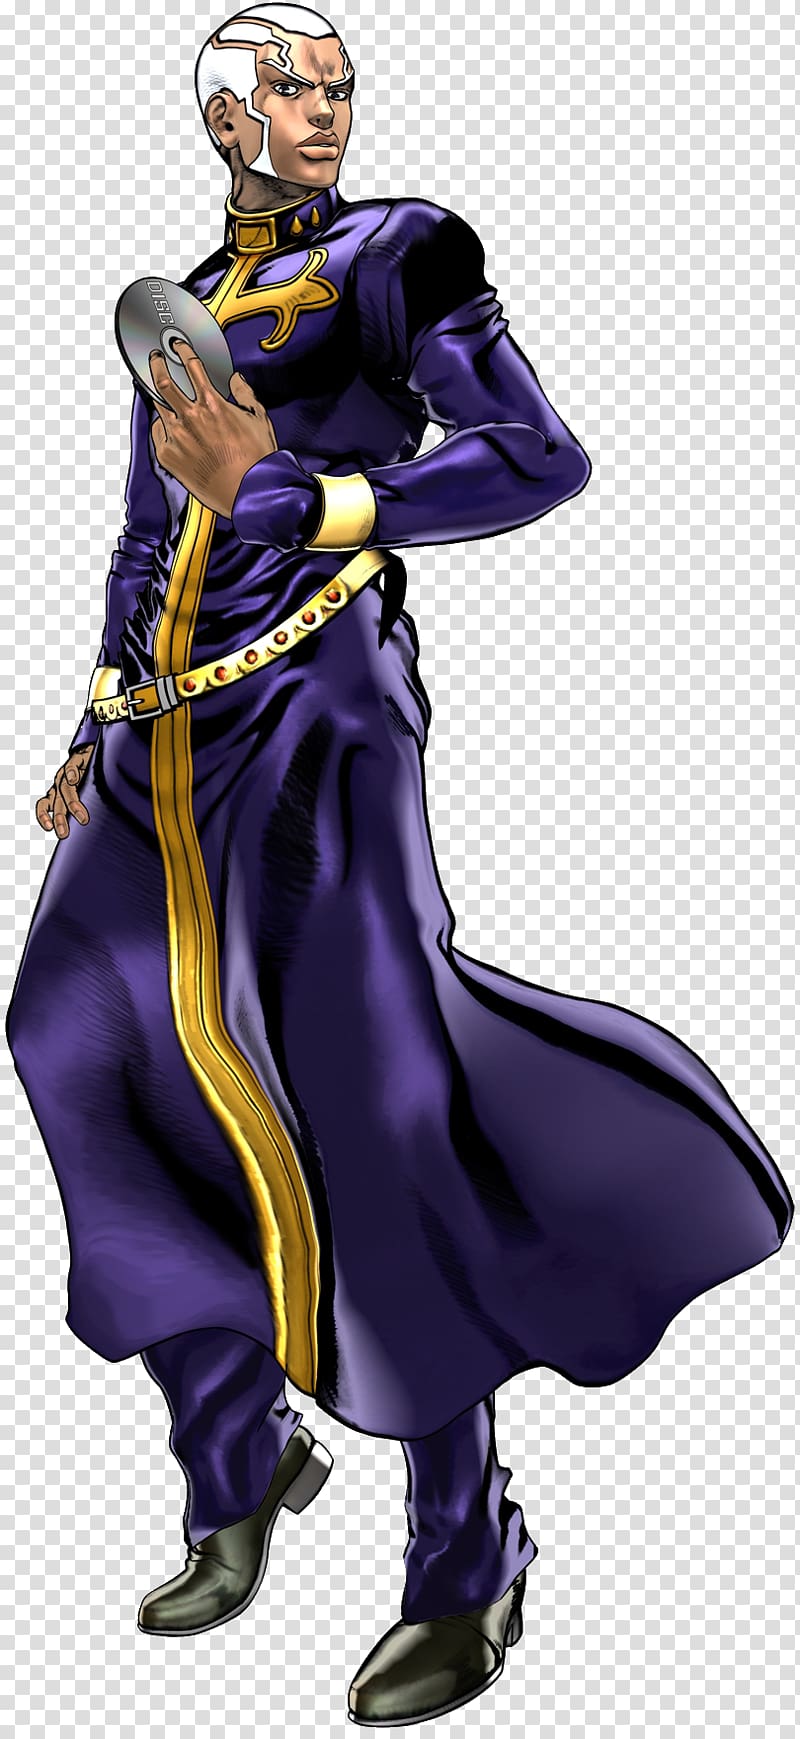 JoJo\'s Bizarre Adventure: Eyes of Heaven Fate/stay night Enrico Pucci Character, HEAVEN transparent background PNG clipart